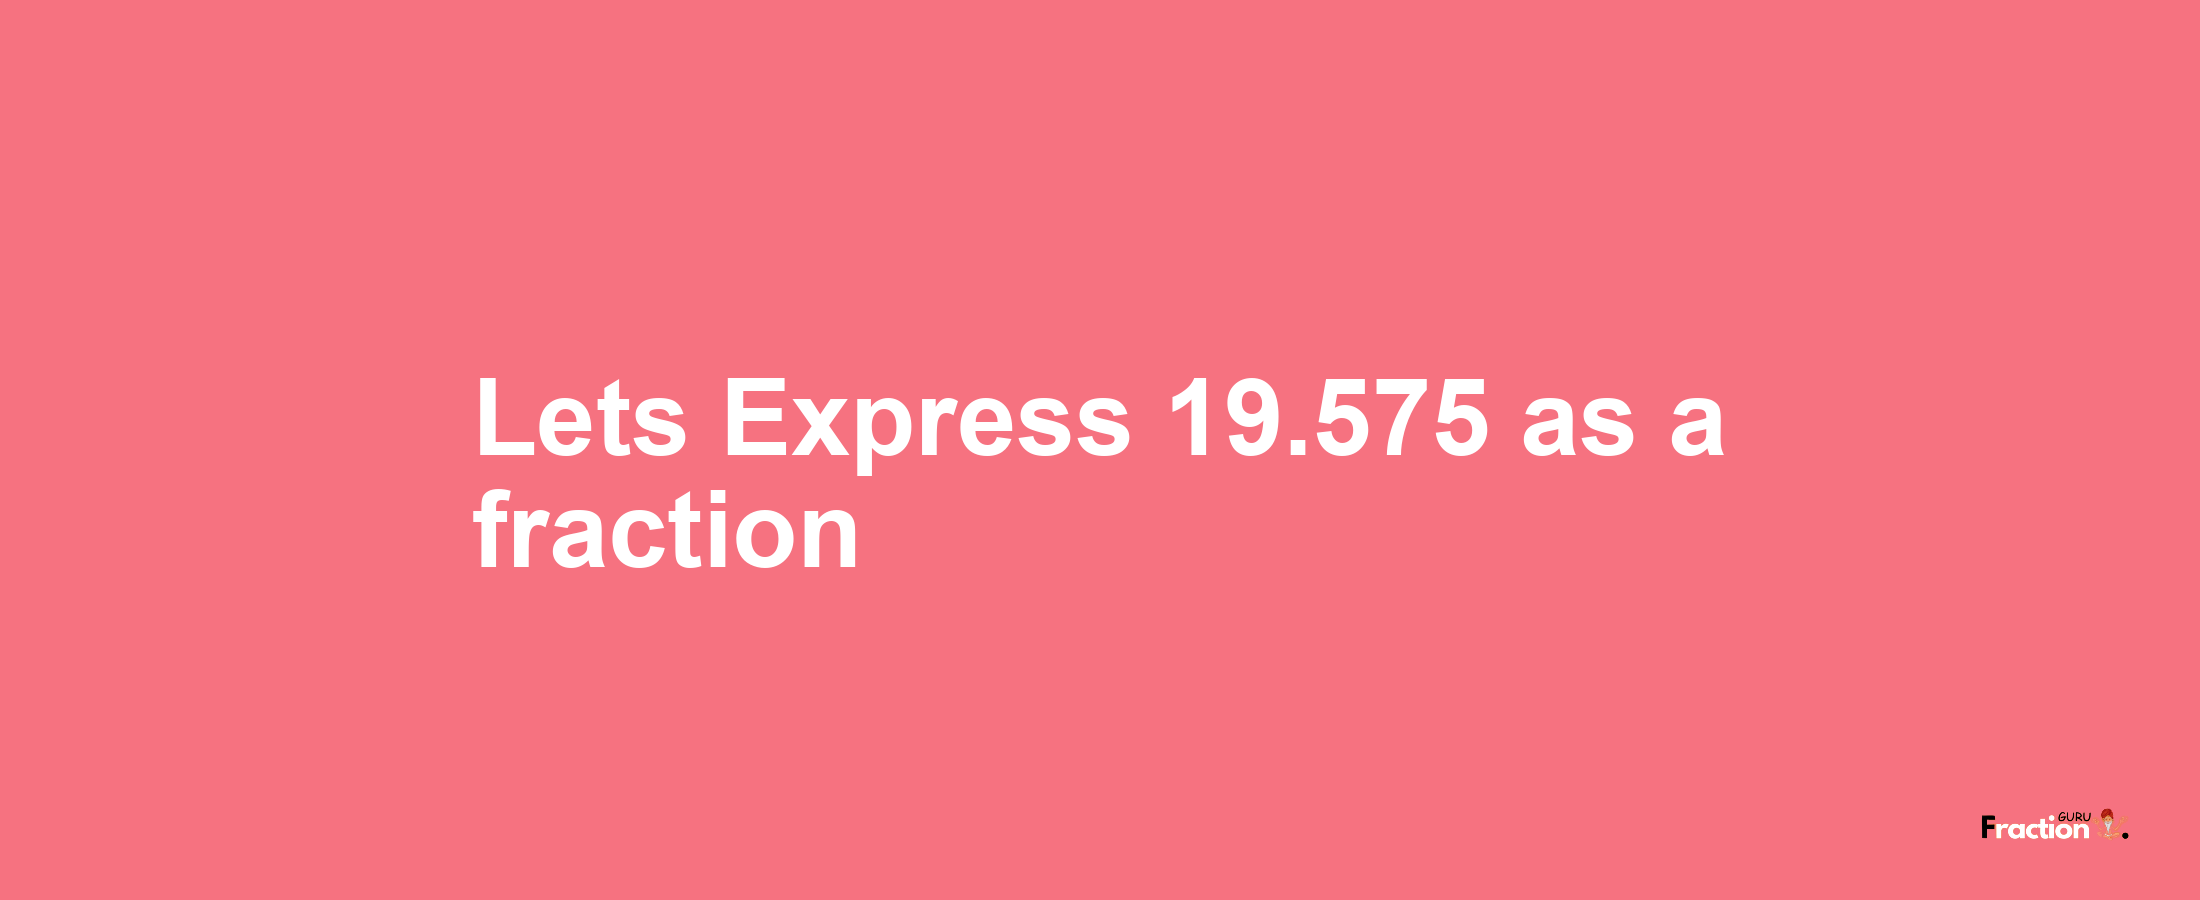 Lets Express 19.575 as afraction